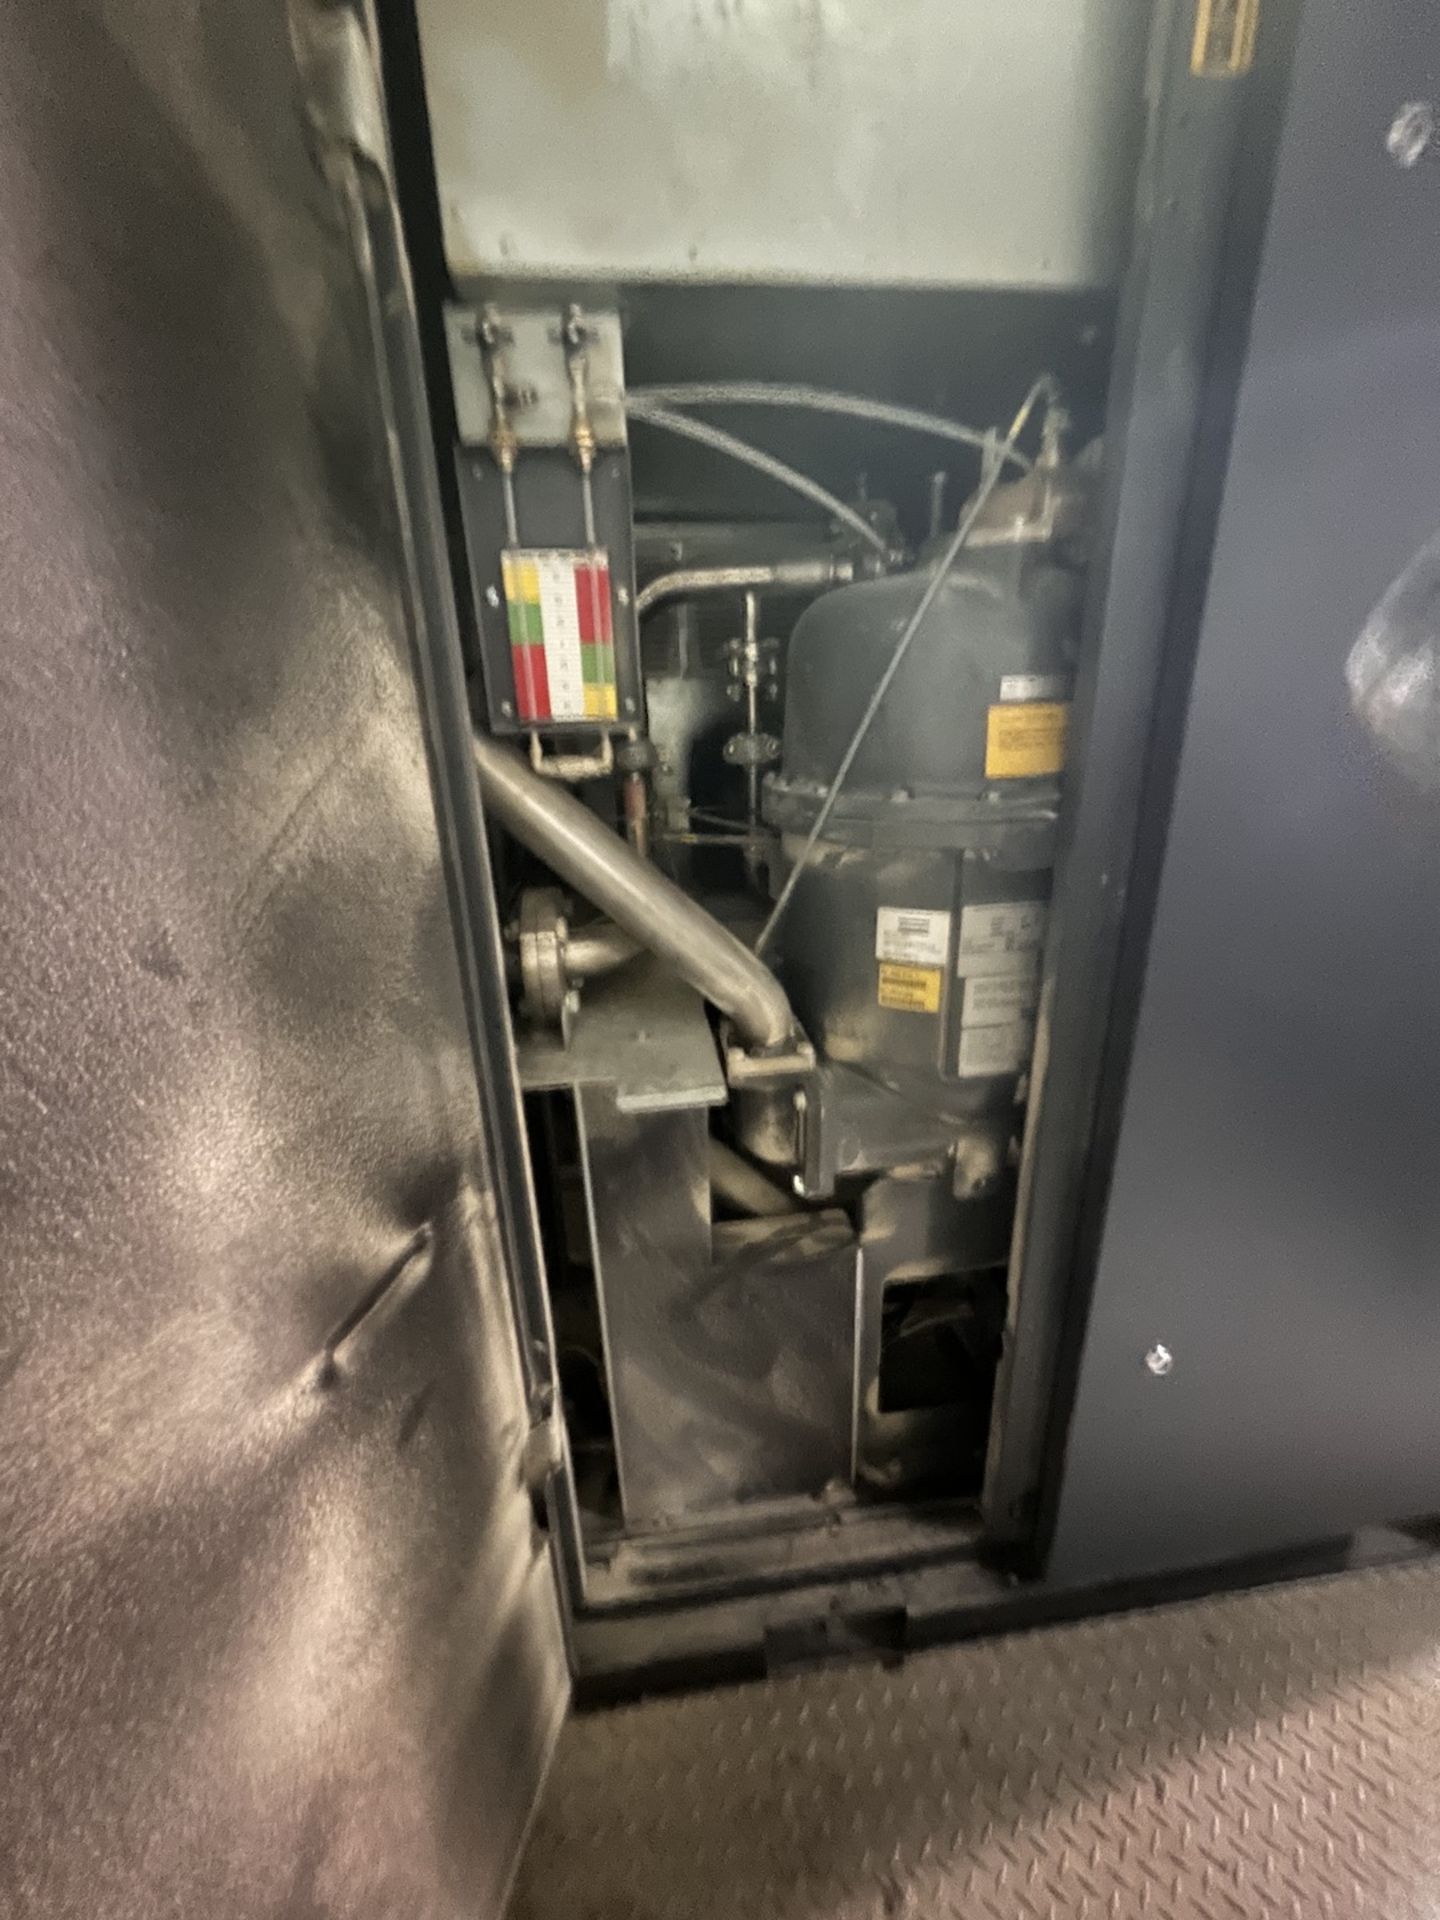 2019 ATLAS COPCO AIR COMPRESSOR, MODEL ZT90VSD-FF, S/N AIA 0116669, APPROX. 17,404 HOURS, IMD 260 - Image 15 of 26